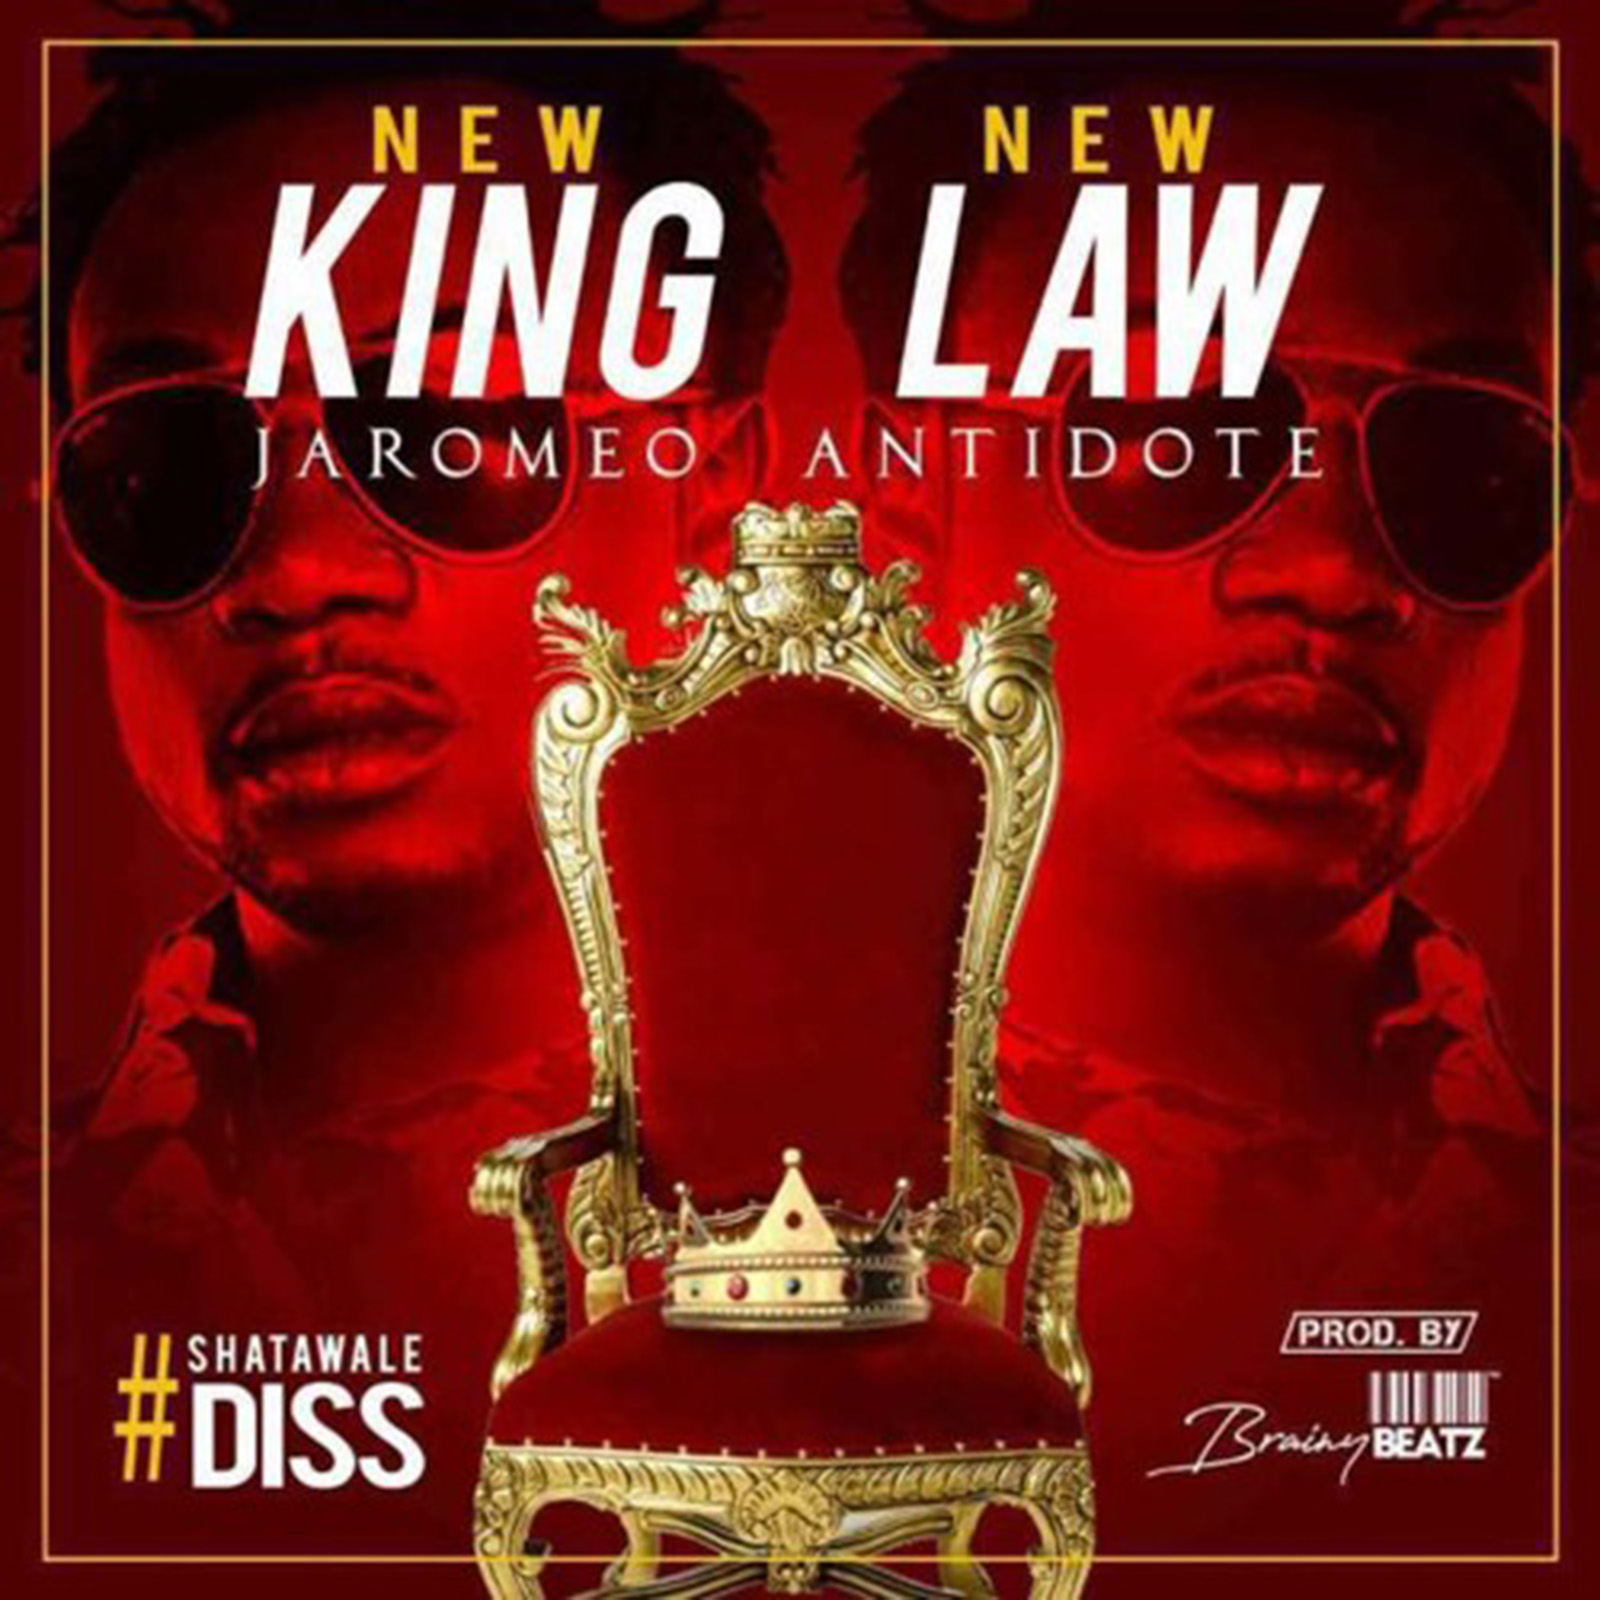 New King New Law (Shatta Wale Diss) by Jaromeo Antidote